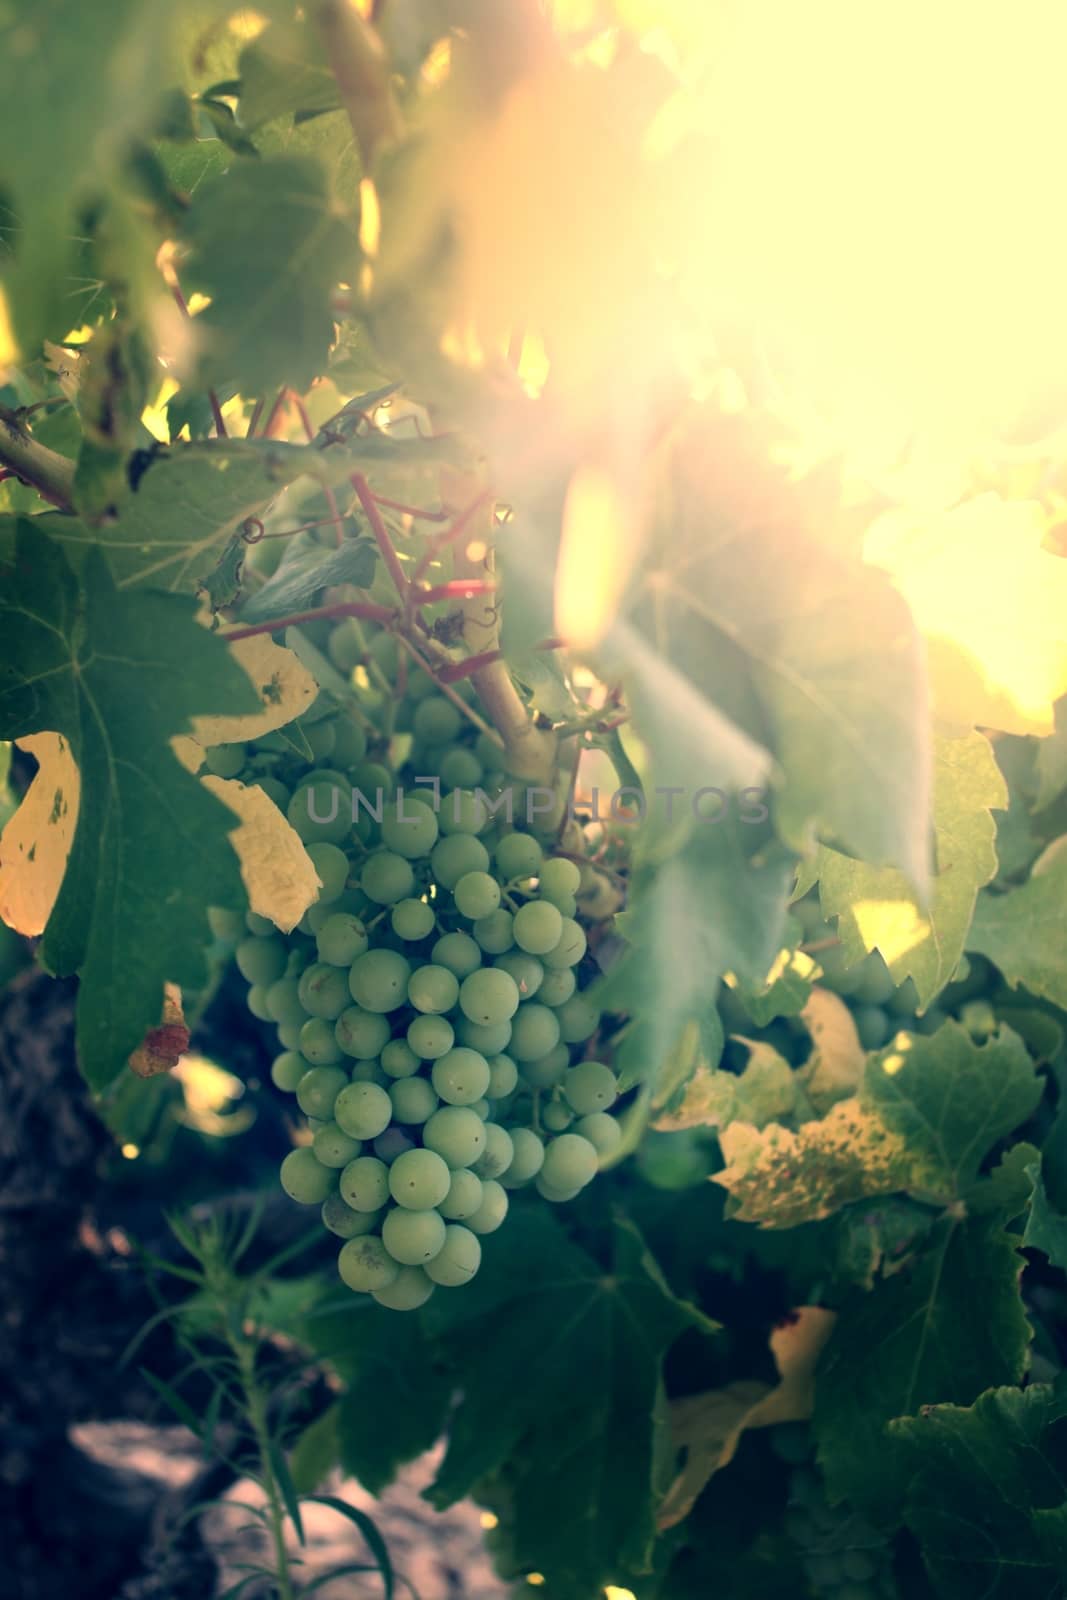 Grapes in the vineyard at sunset by Barbraford